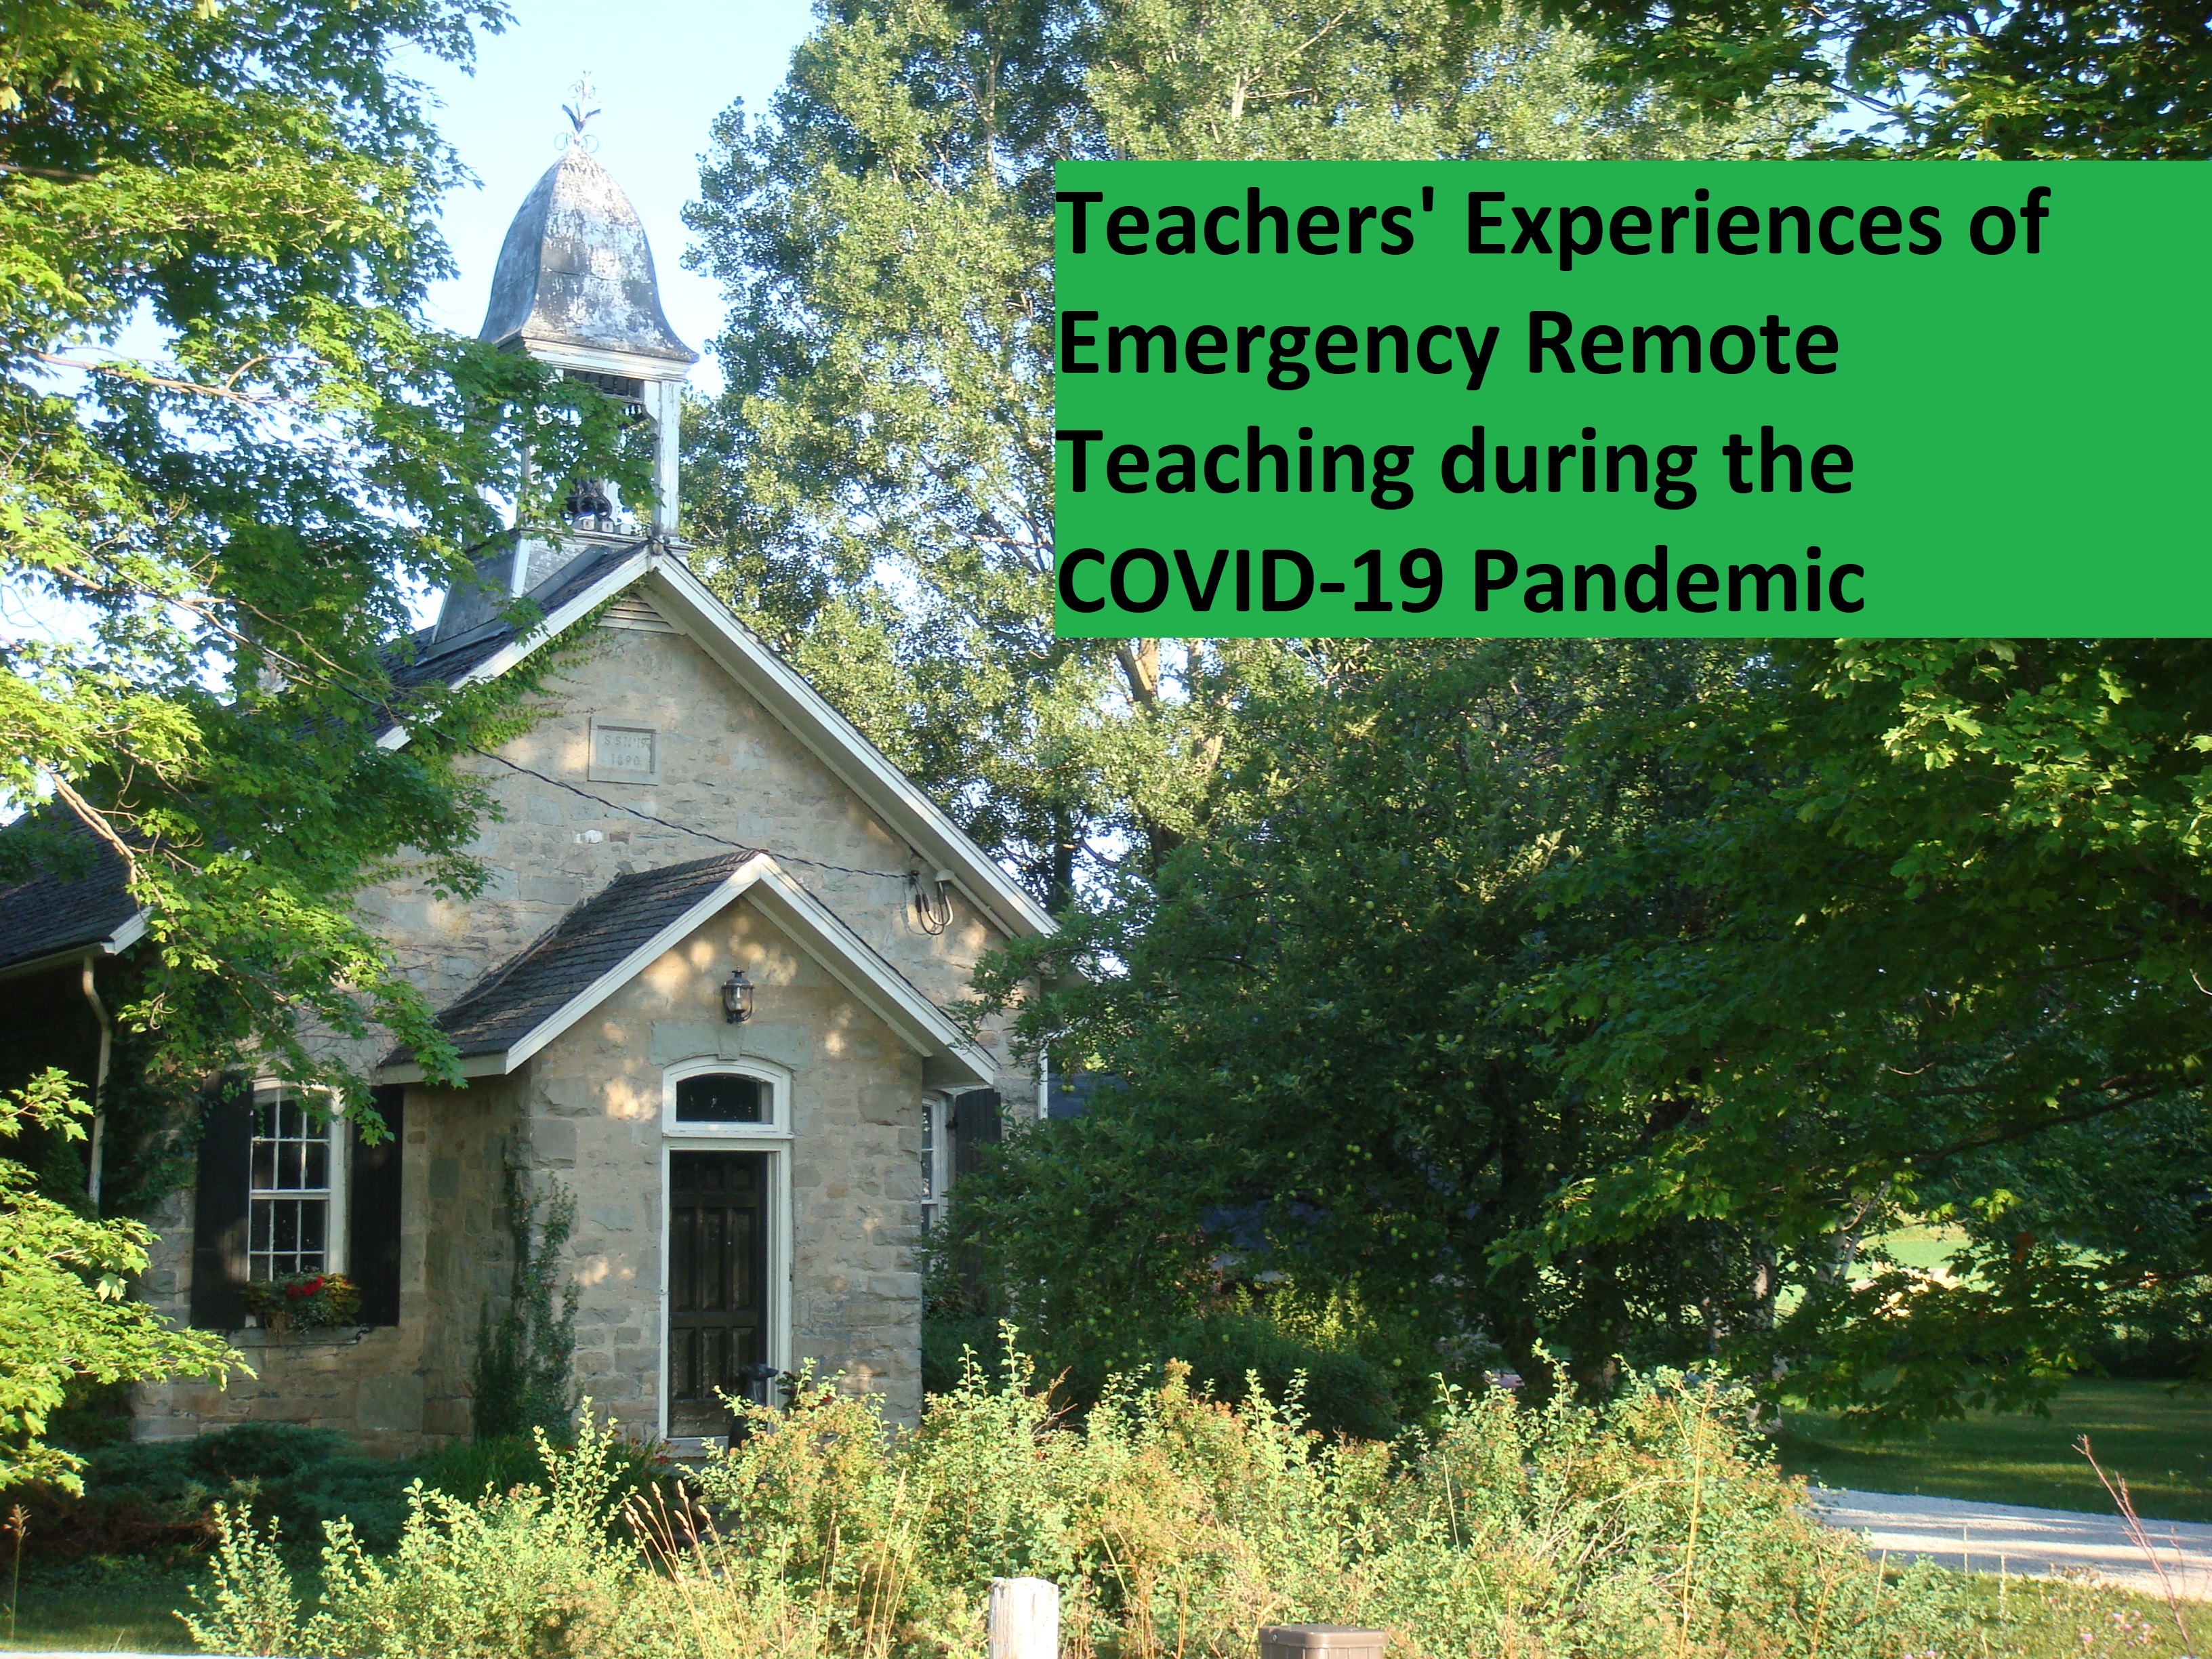 Teachers' Experiences of Emergency Remote Teaching During the COVID-19 Pandemic